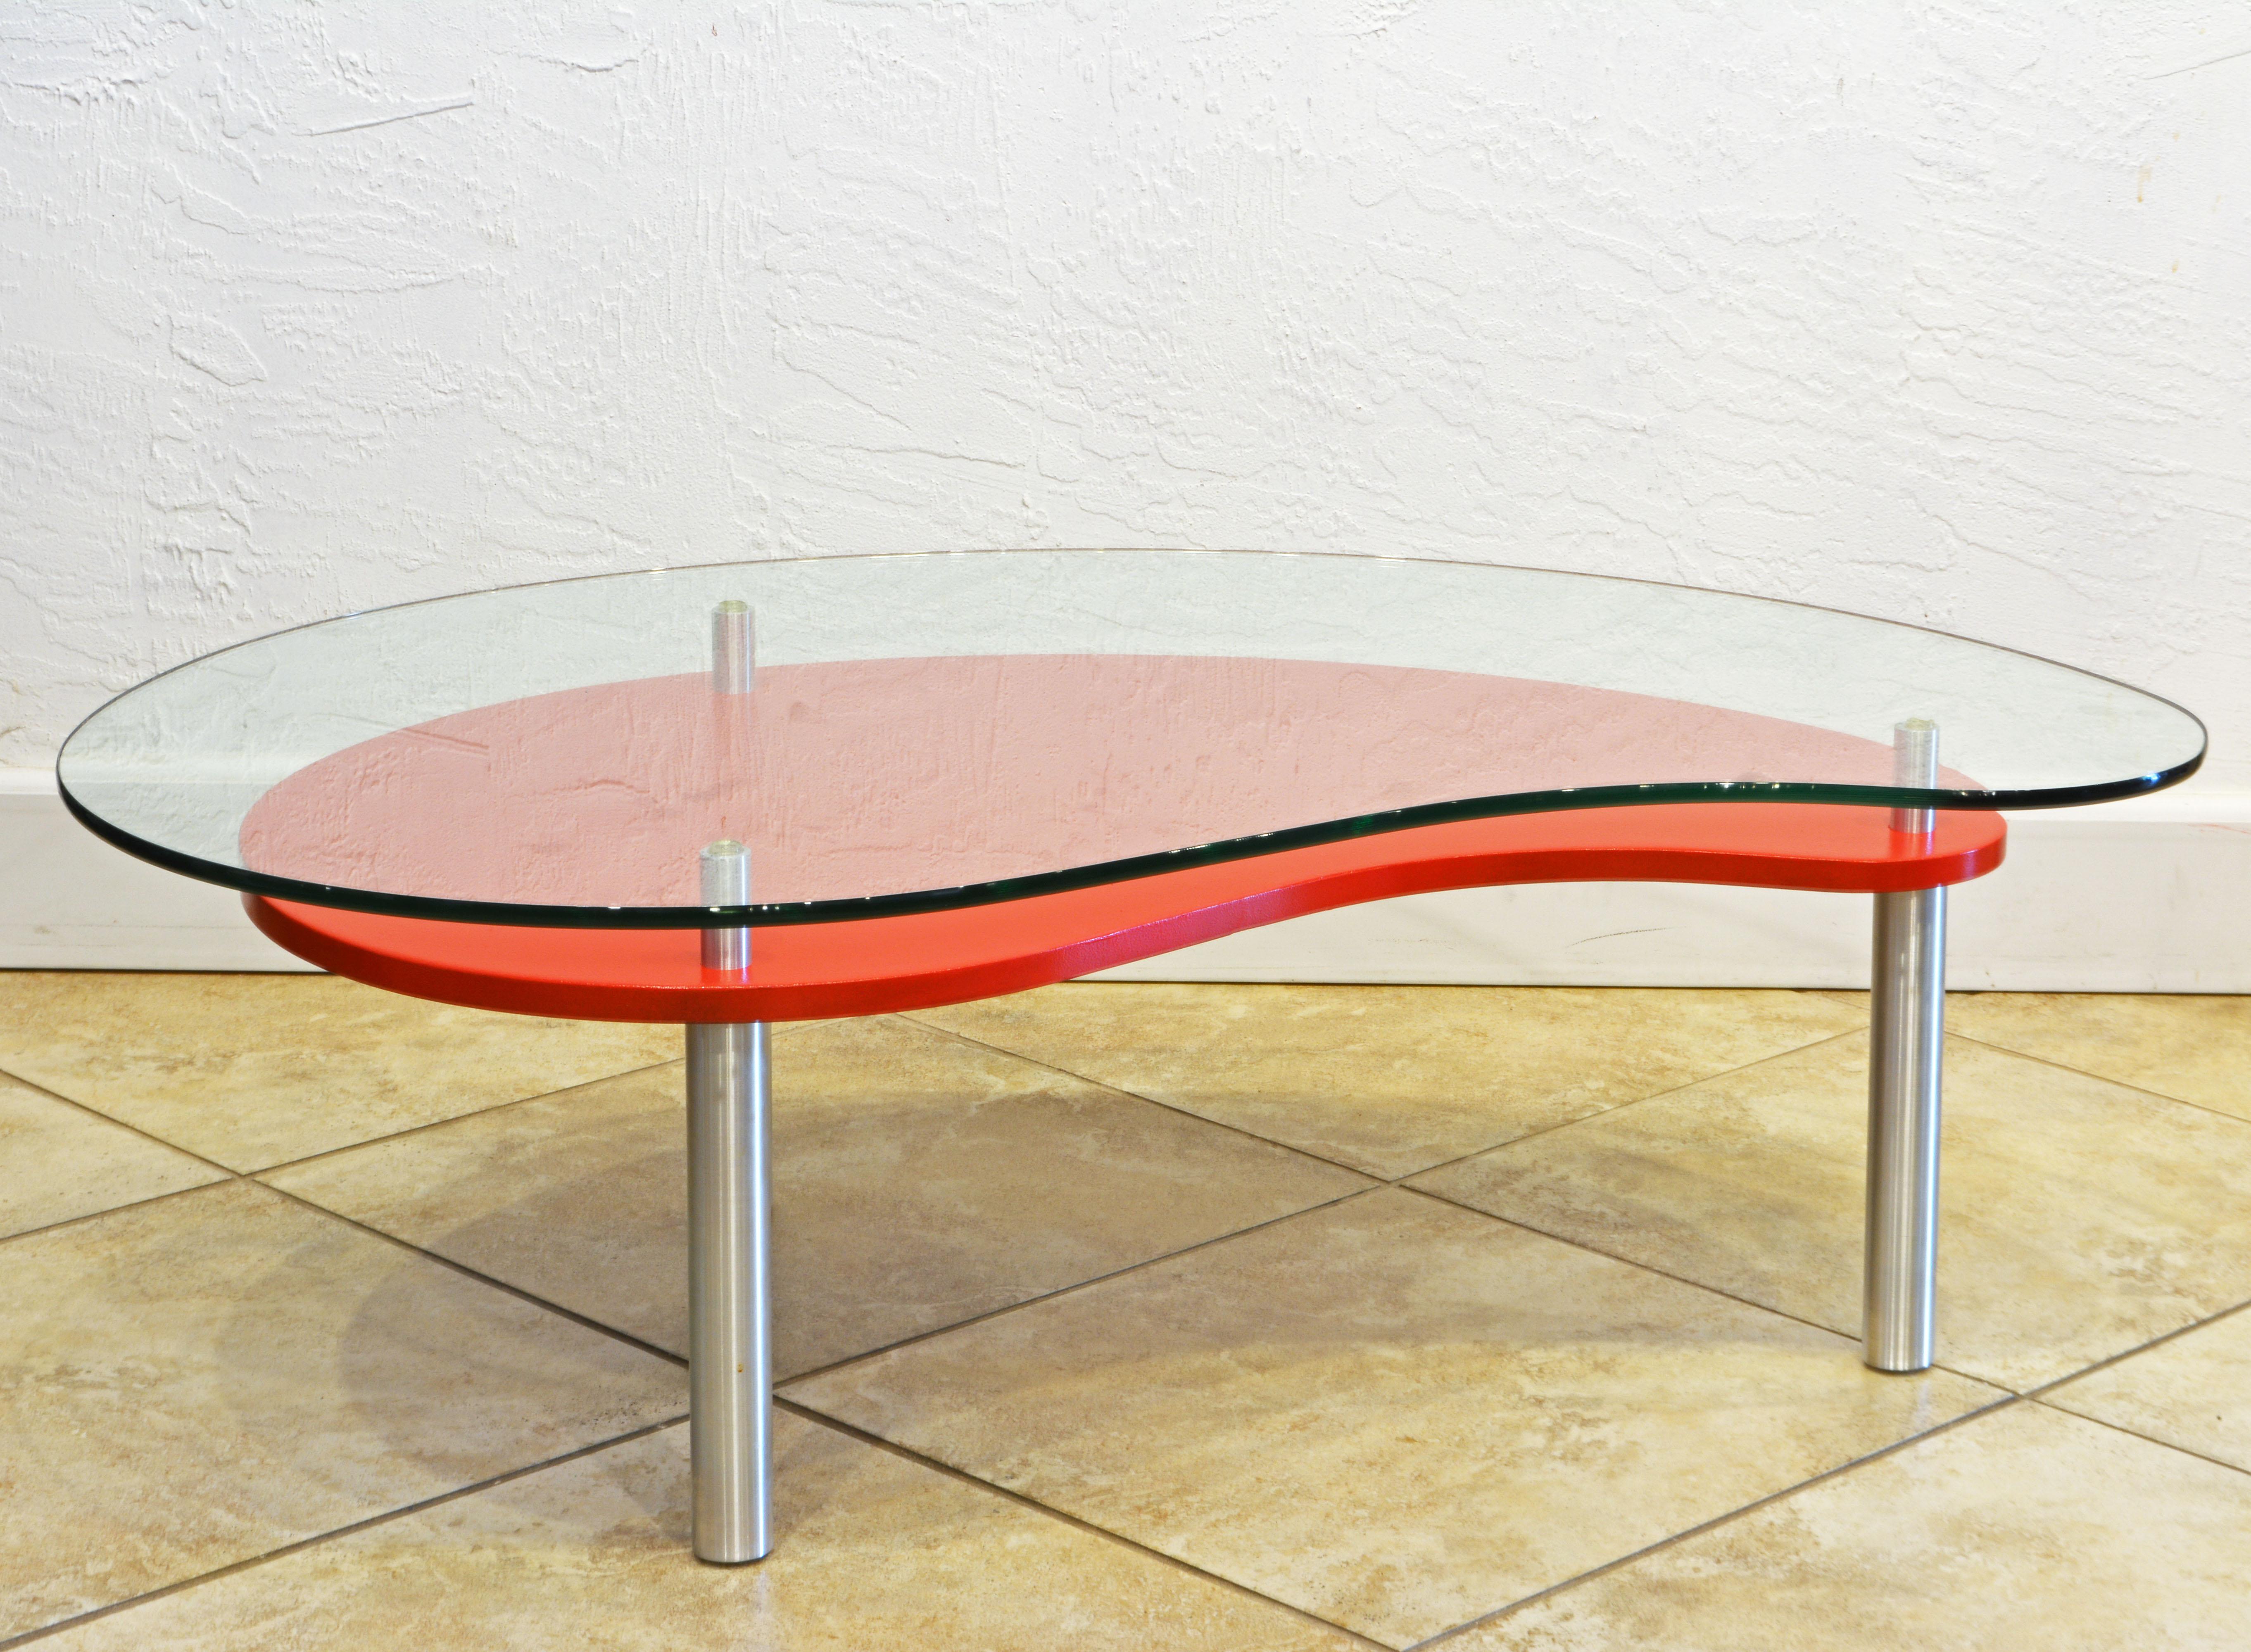 This Minimalist design kidney shape two tier coffee table features a thick tempered glass top on brushed aluminum legs and a lower red painted display shelf adding an almost abstract effect.